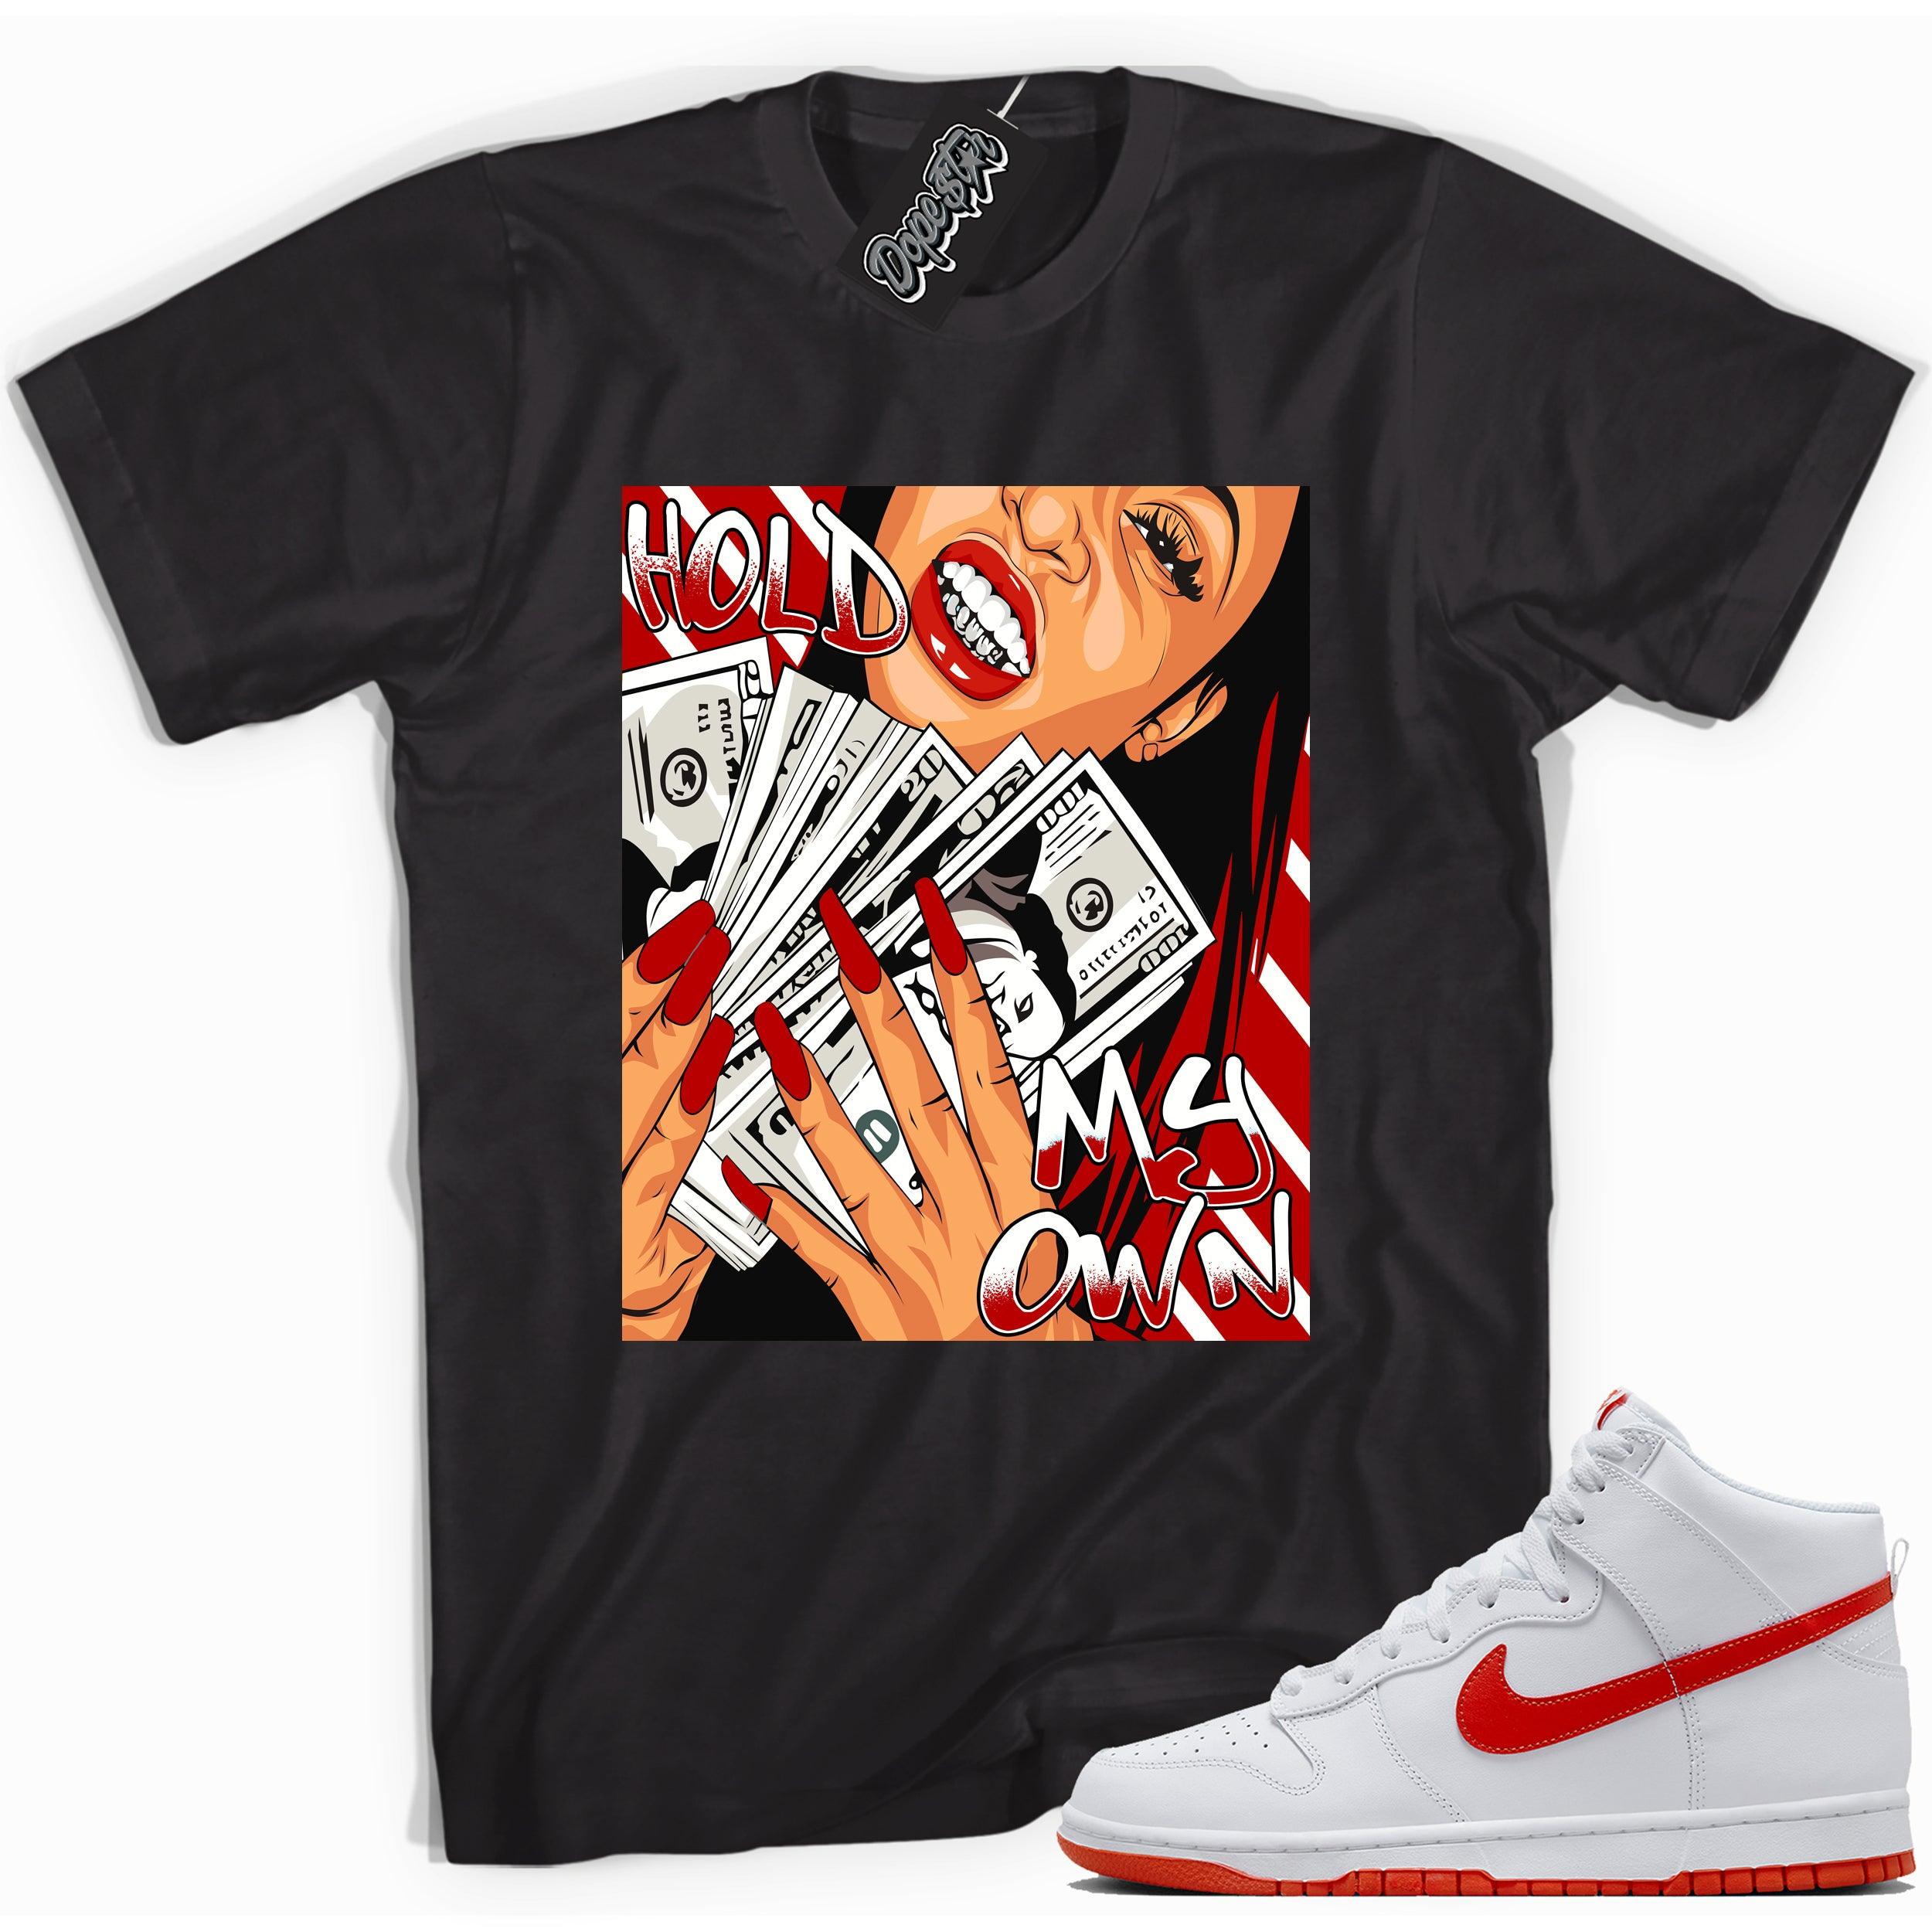 Cool black graphic tee with 'hold my own' print, that perfectly matches Nike Dunk High White Picante Red sneakers.